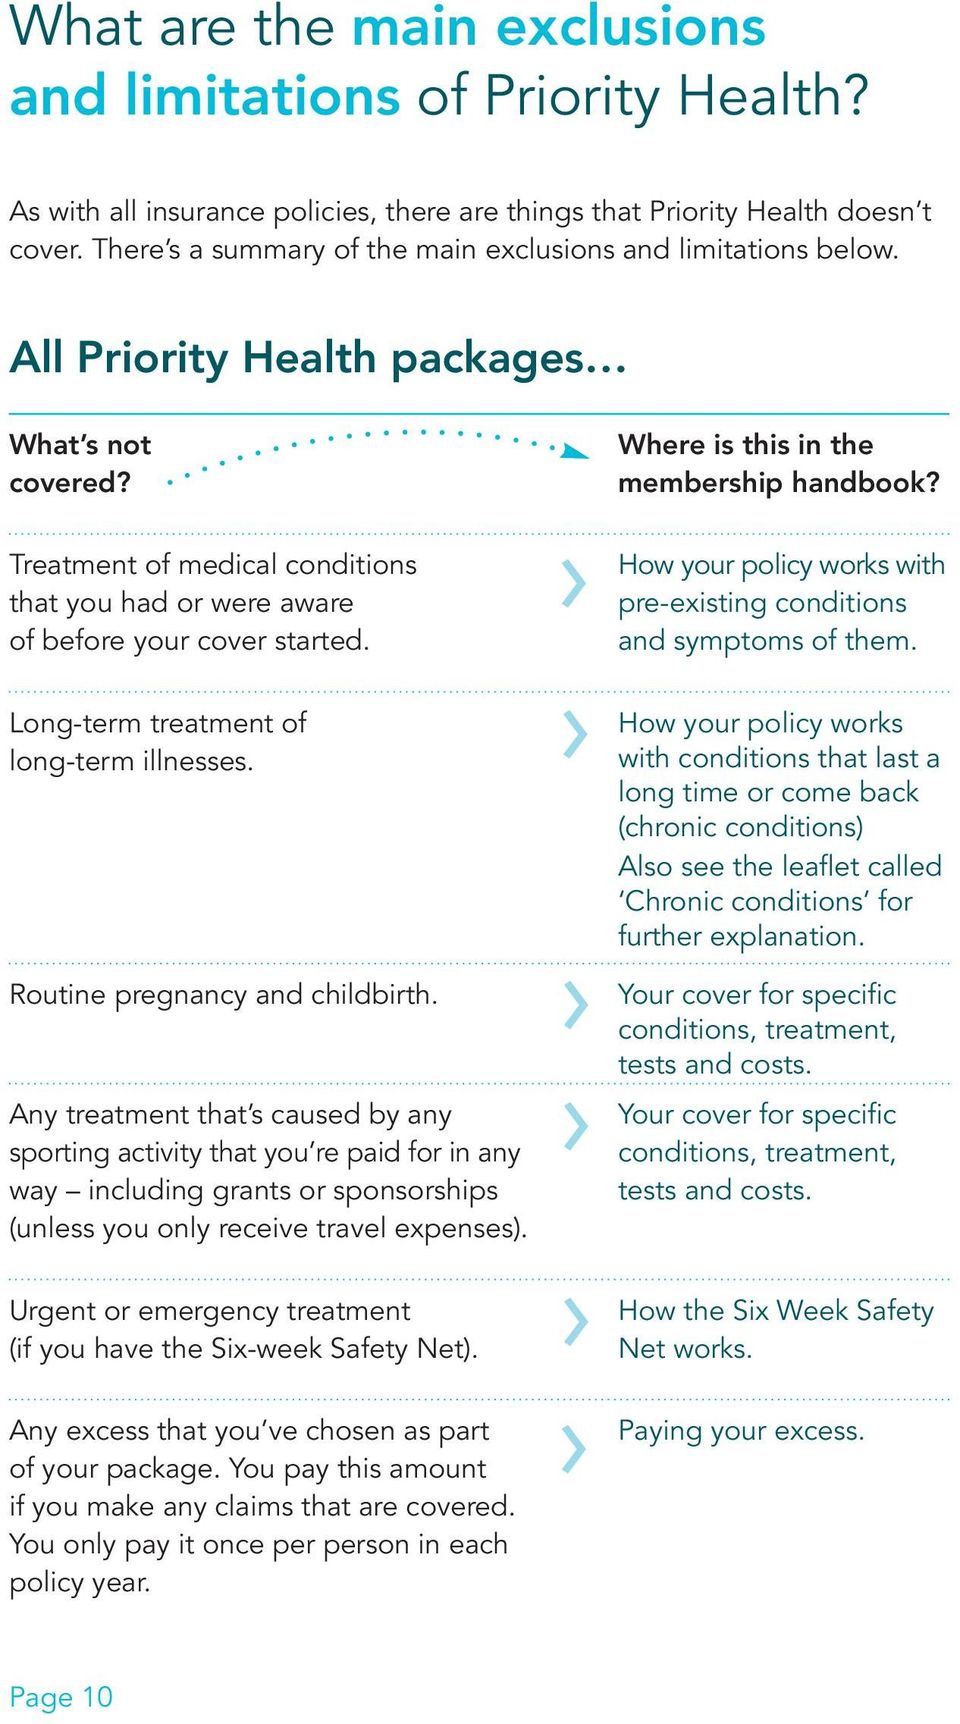 Treatment of medical conditions that you had or were aware of before your cover started. Long-term treatment of long-term illnesses. Routine pregnancy and childbirth.